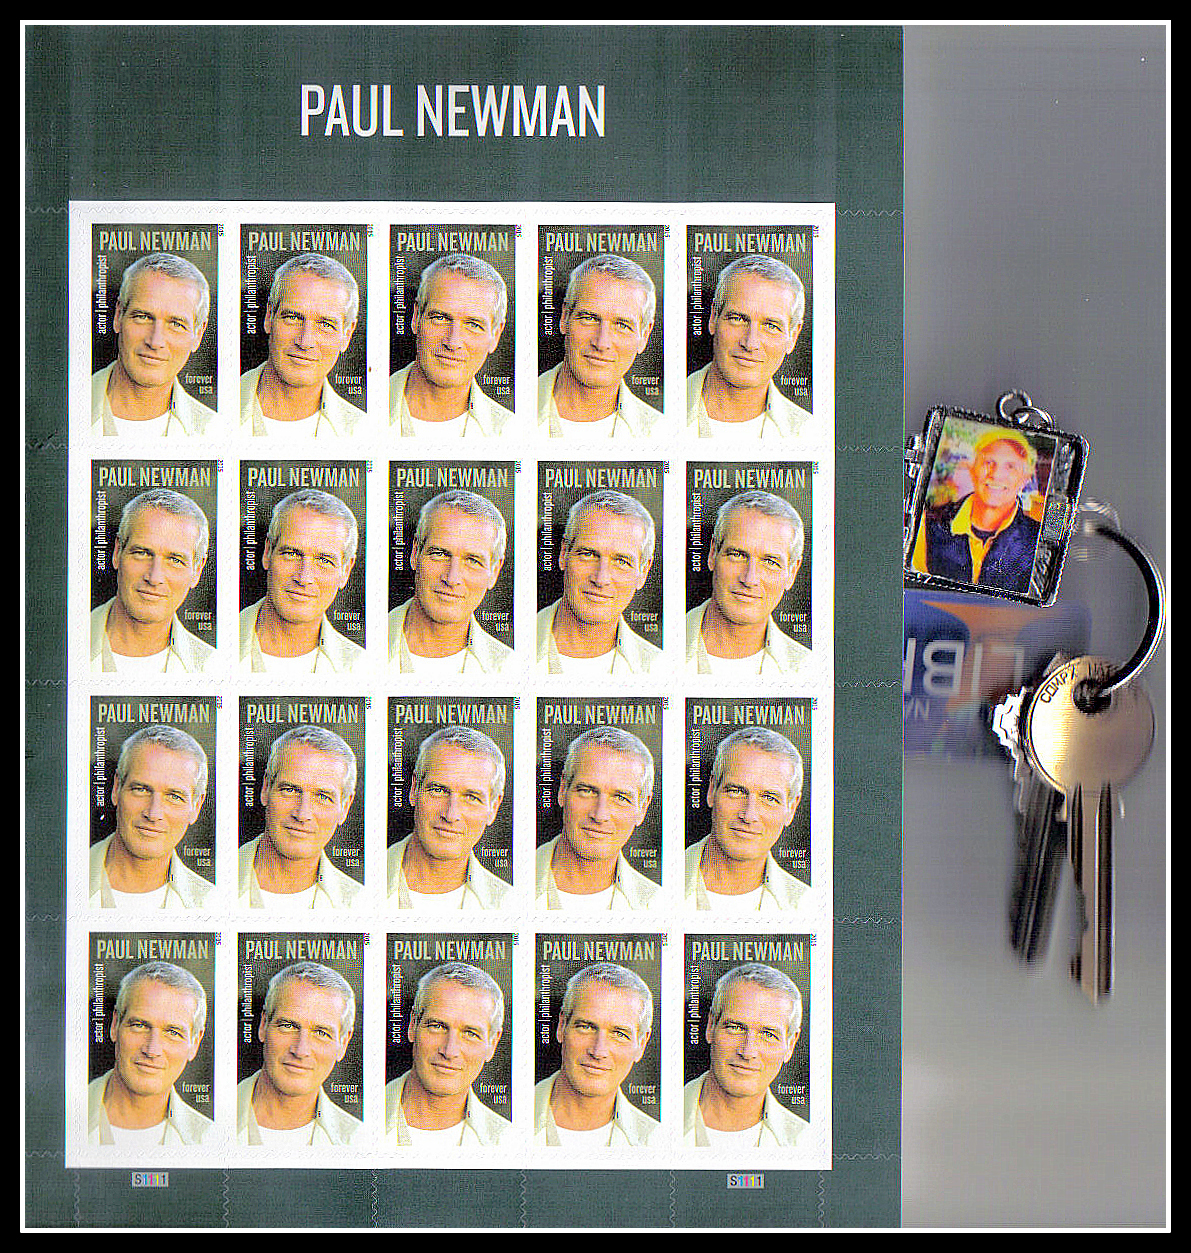 The PAUL NEWMAN Stamp with Jack's keychain